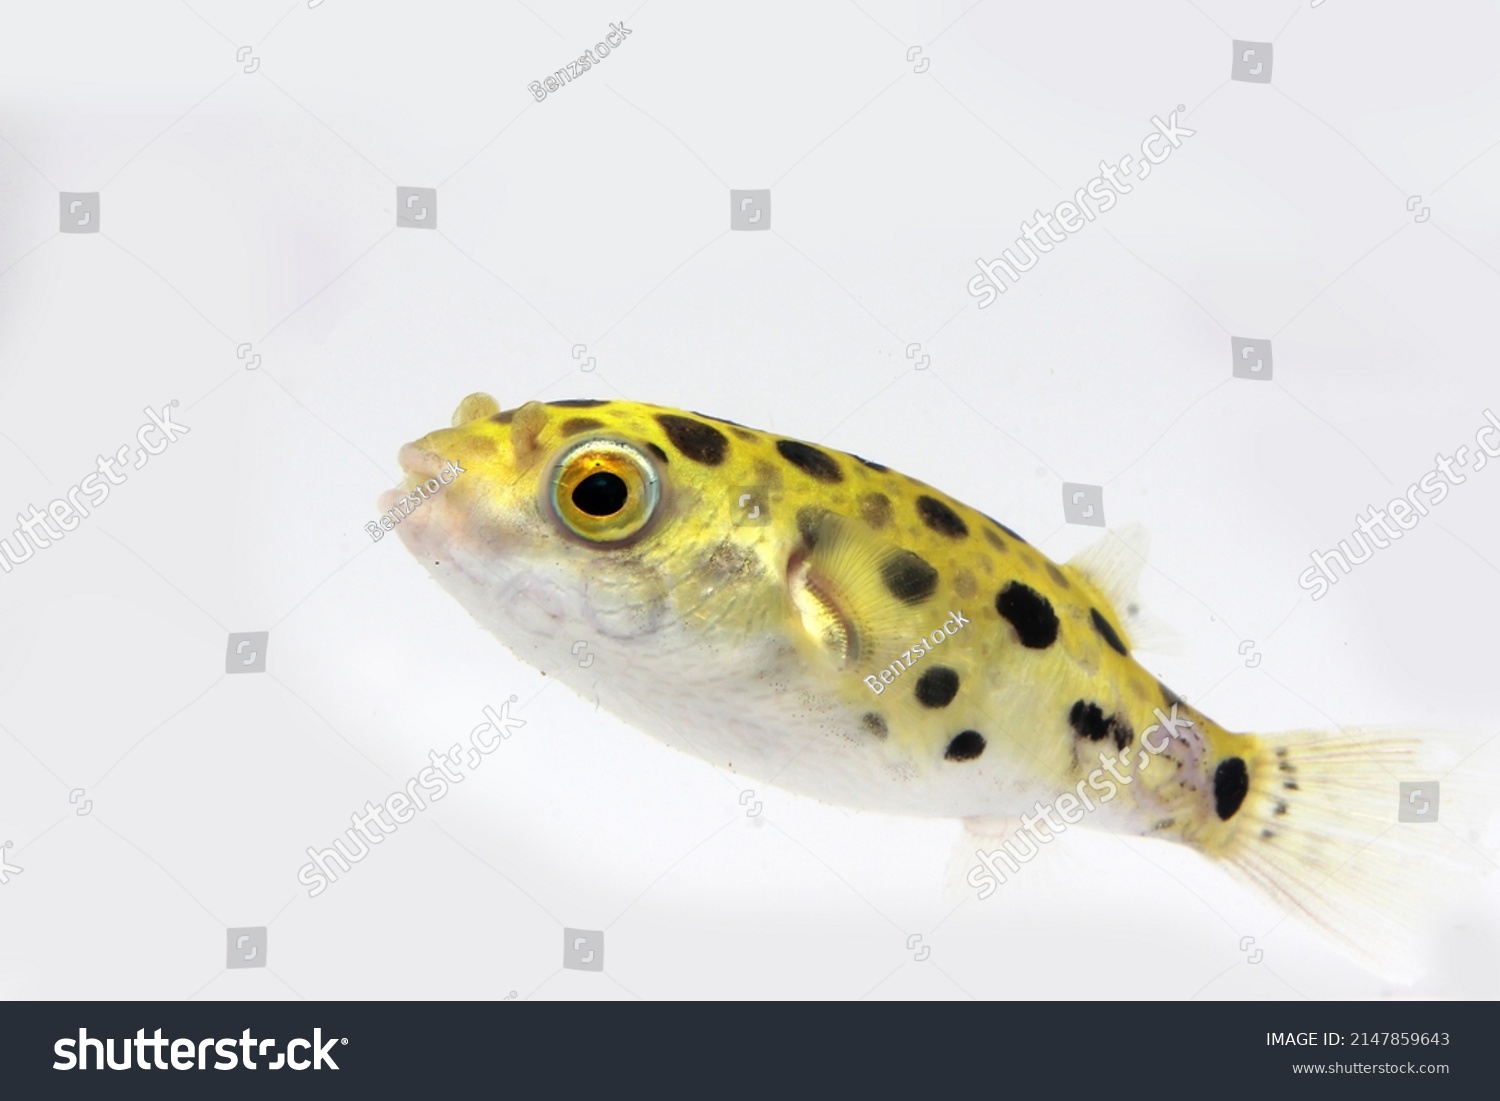 green spotted puffer fish, freshwater puffer fish #2147859643